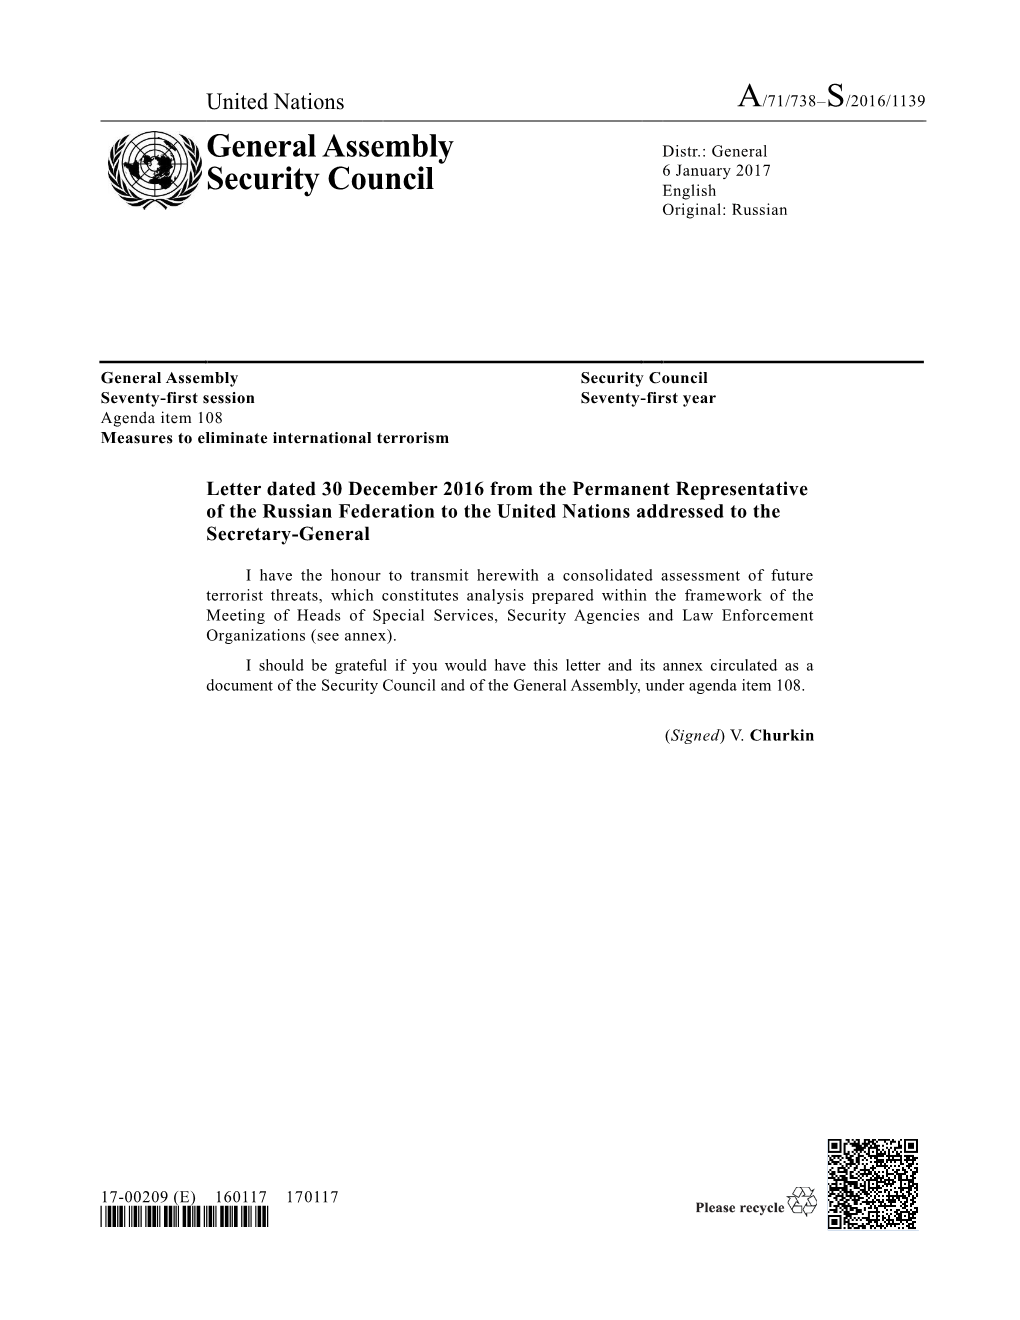 General Assembly Security Council Seventy-First Session Seventy-First Year Agenda Item 108 Measures to Eliminate International Terrorism